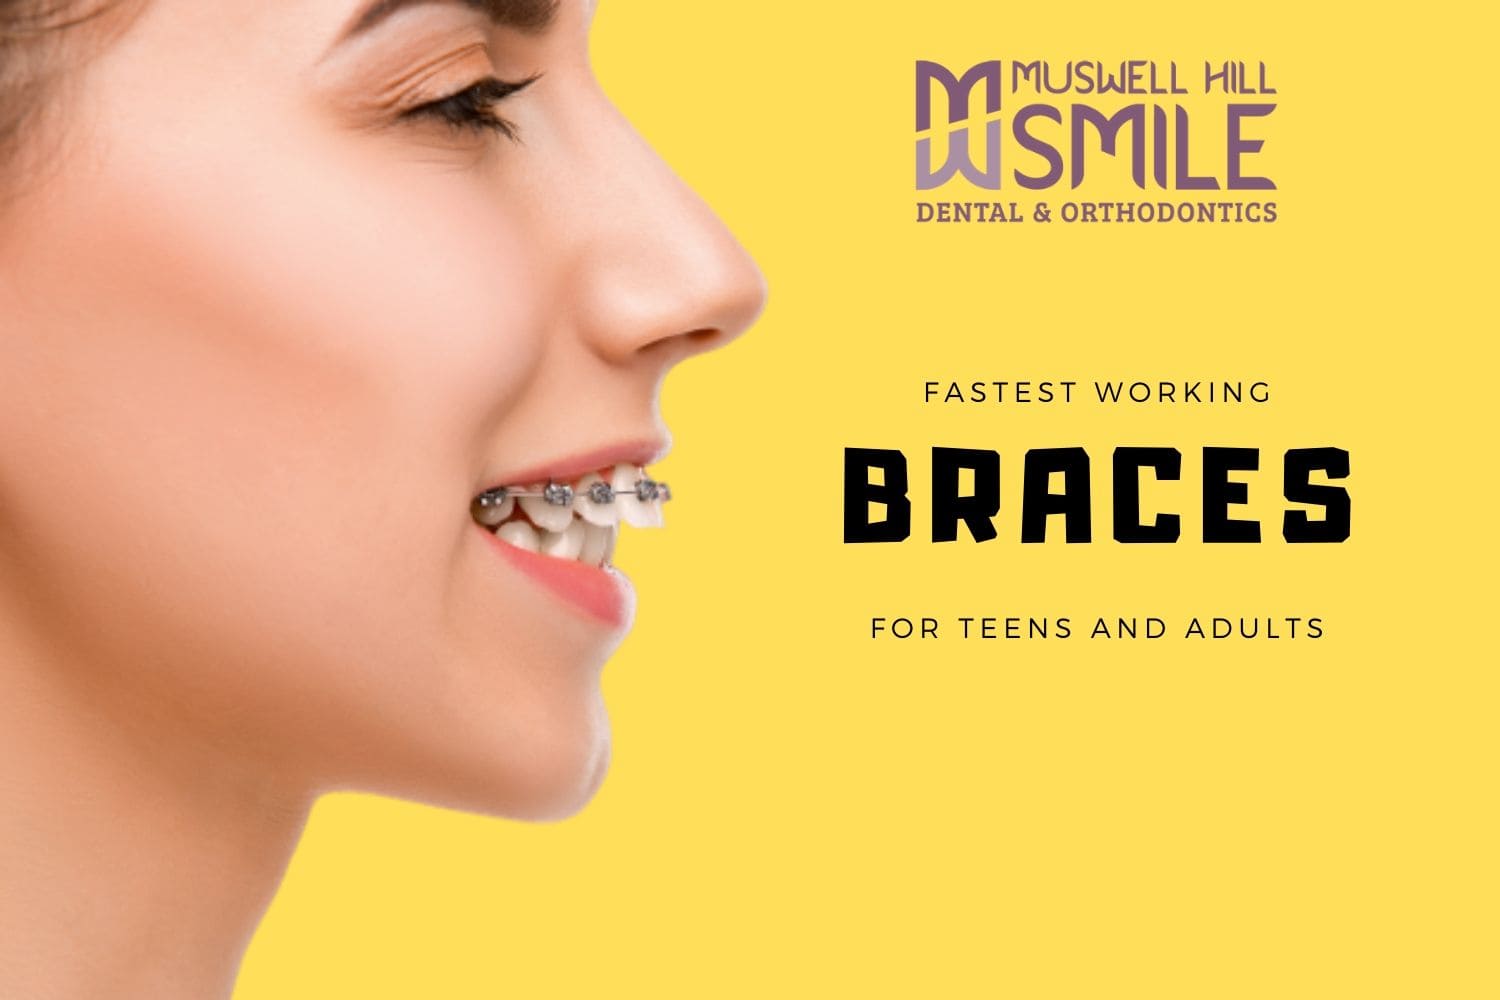 Why is Invisalign Faster than Braces? The Key to a Speedy Smile